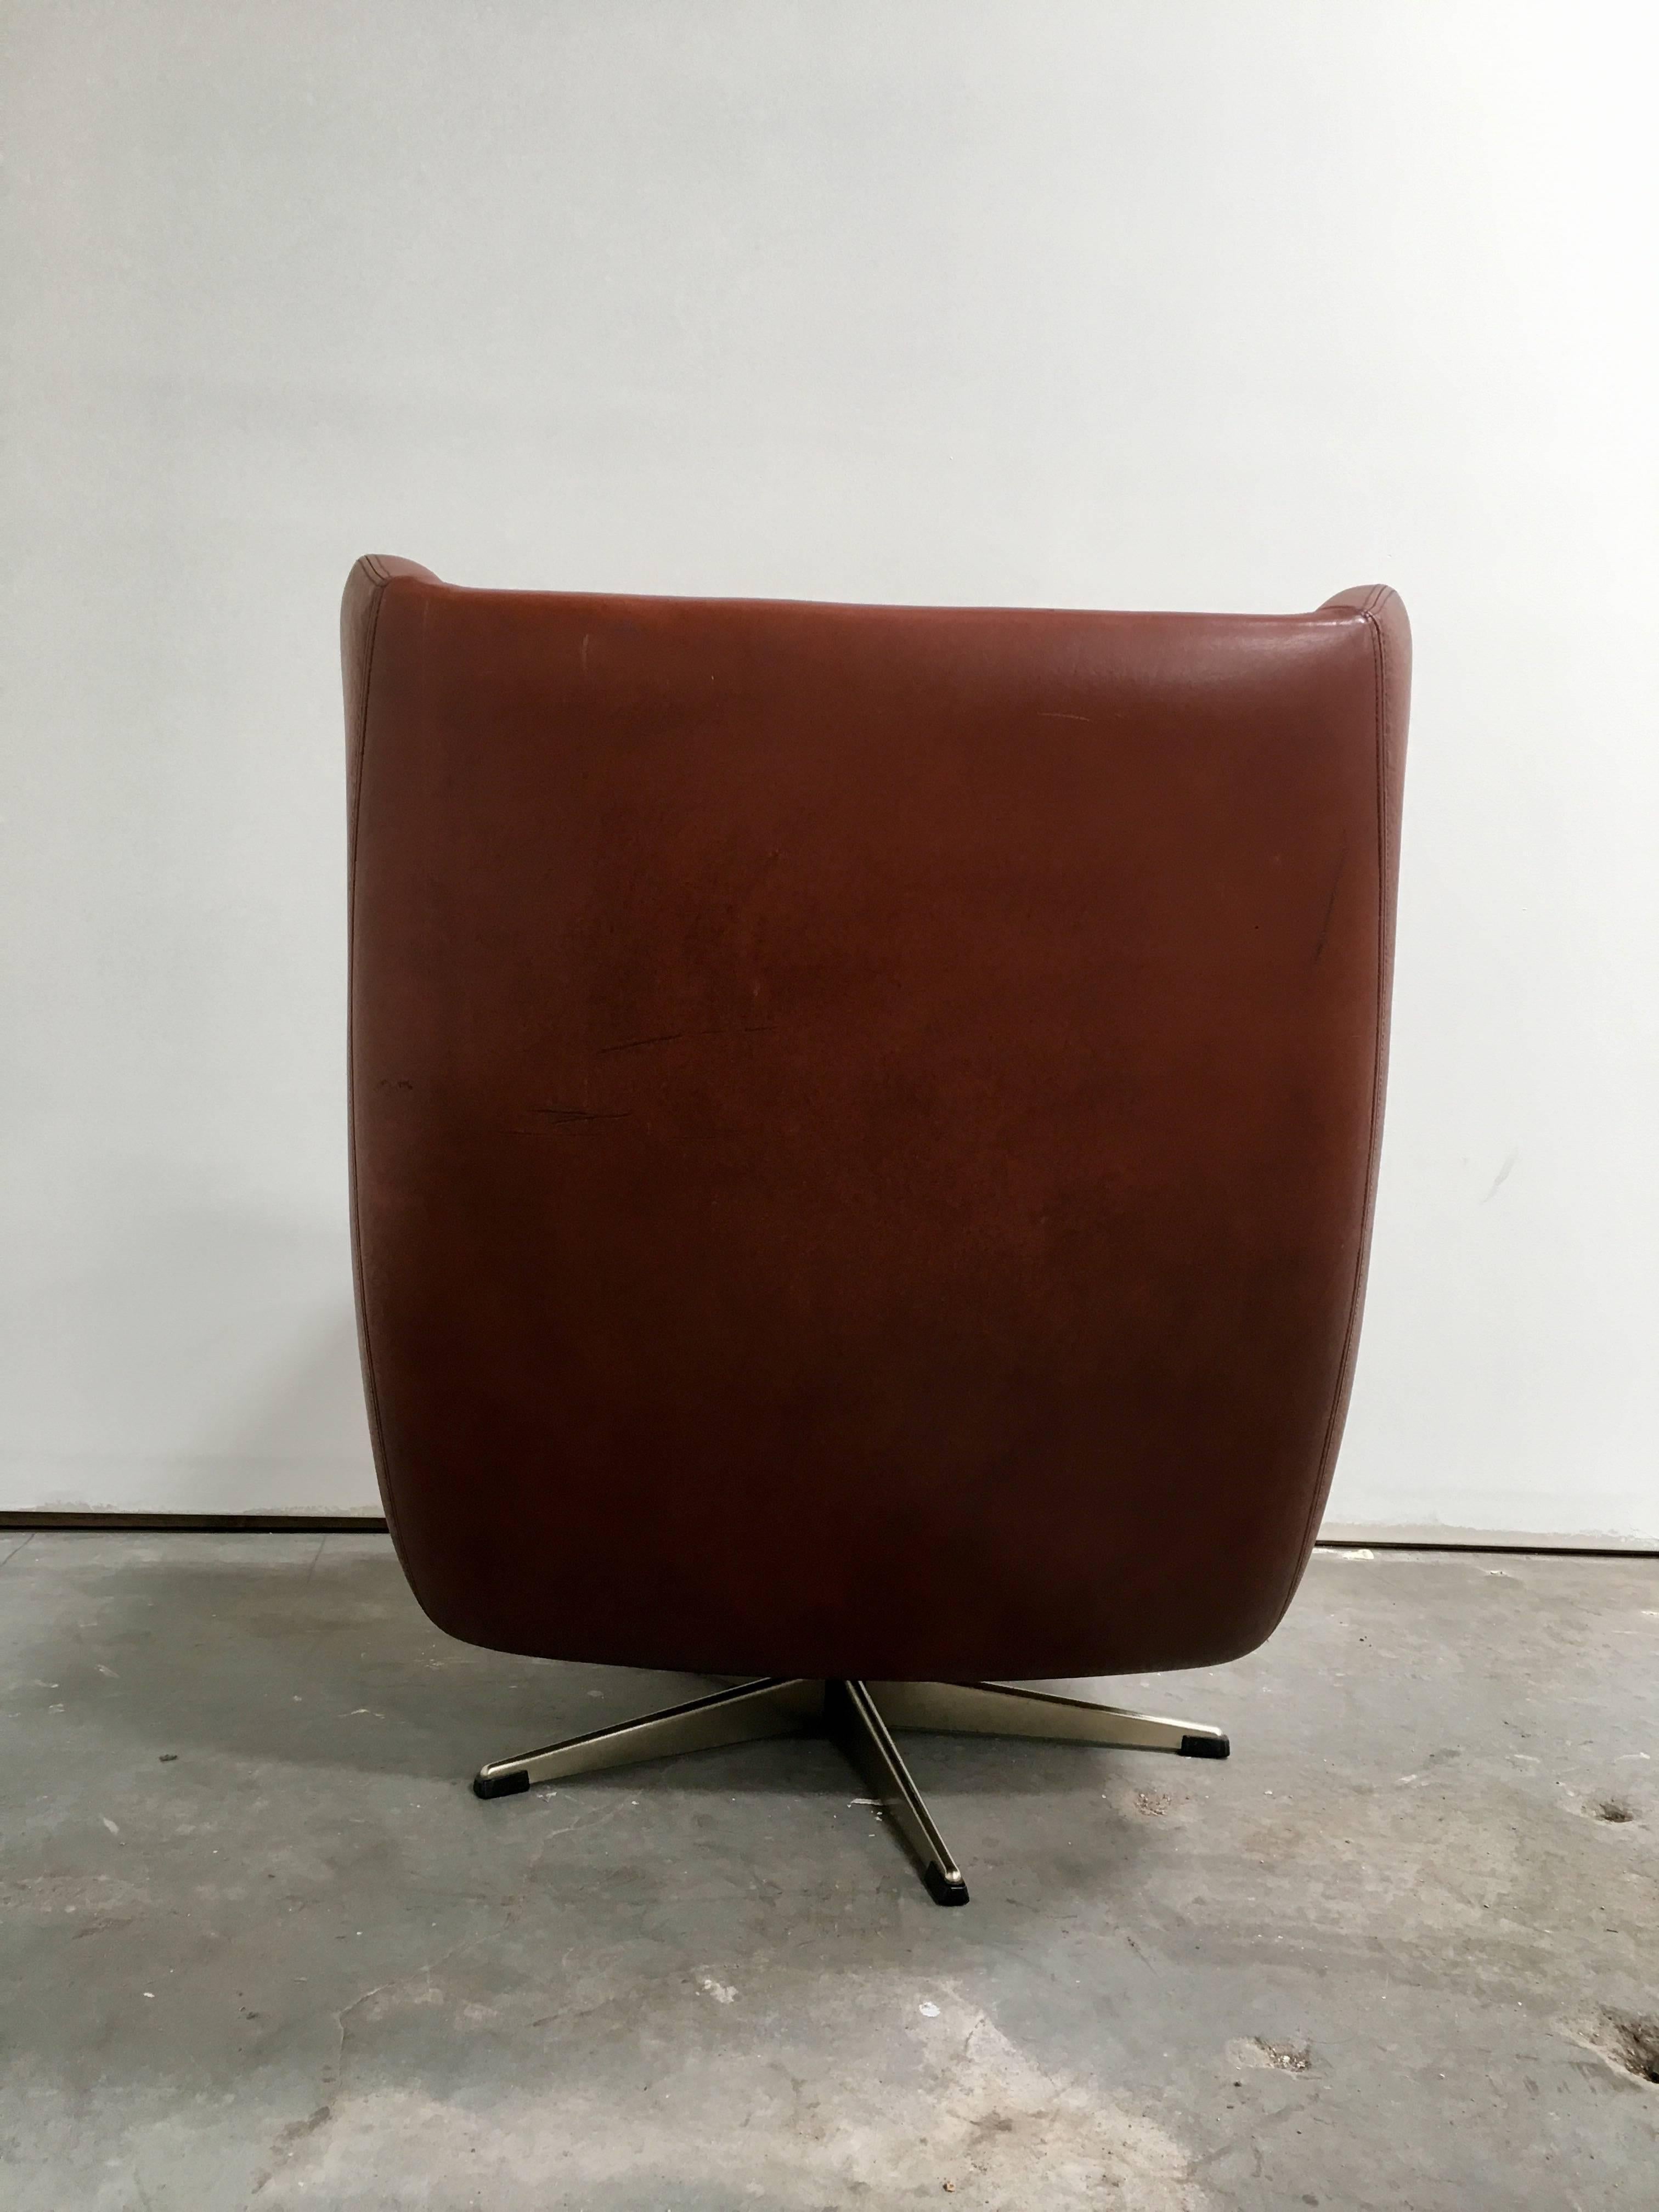 Vintage Danish Modern swivel chair in original brown leather upholstery. Two tufted back cushions and one tufted seat cushion, uniquely angular arm rests, and chrome metal base. 20